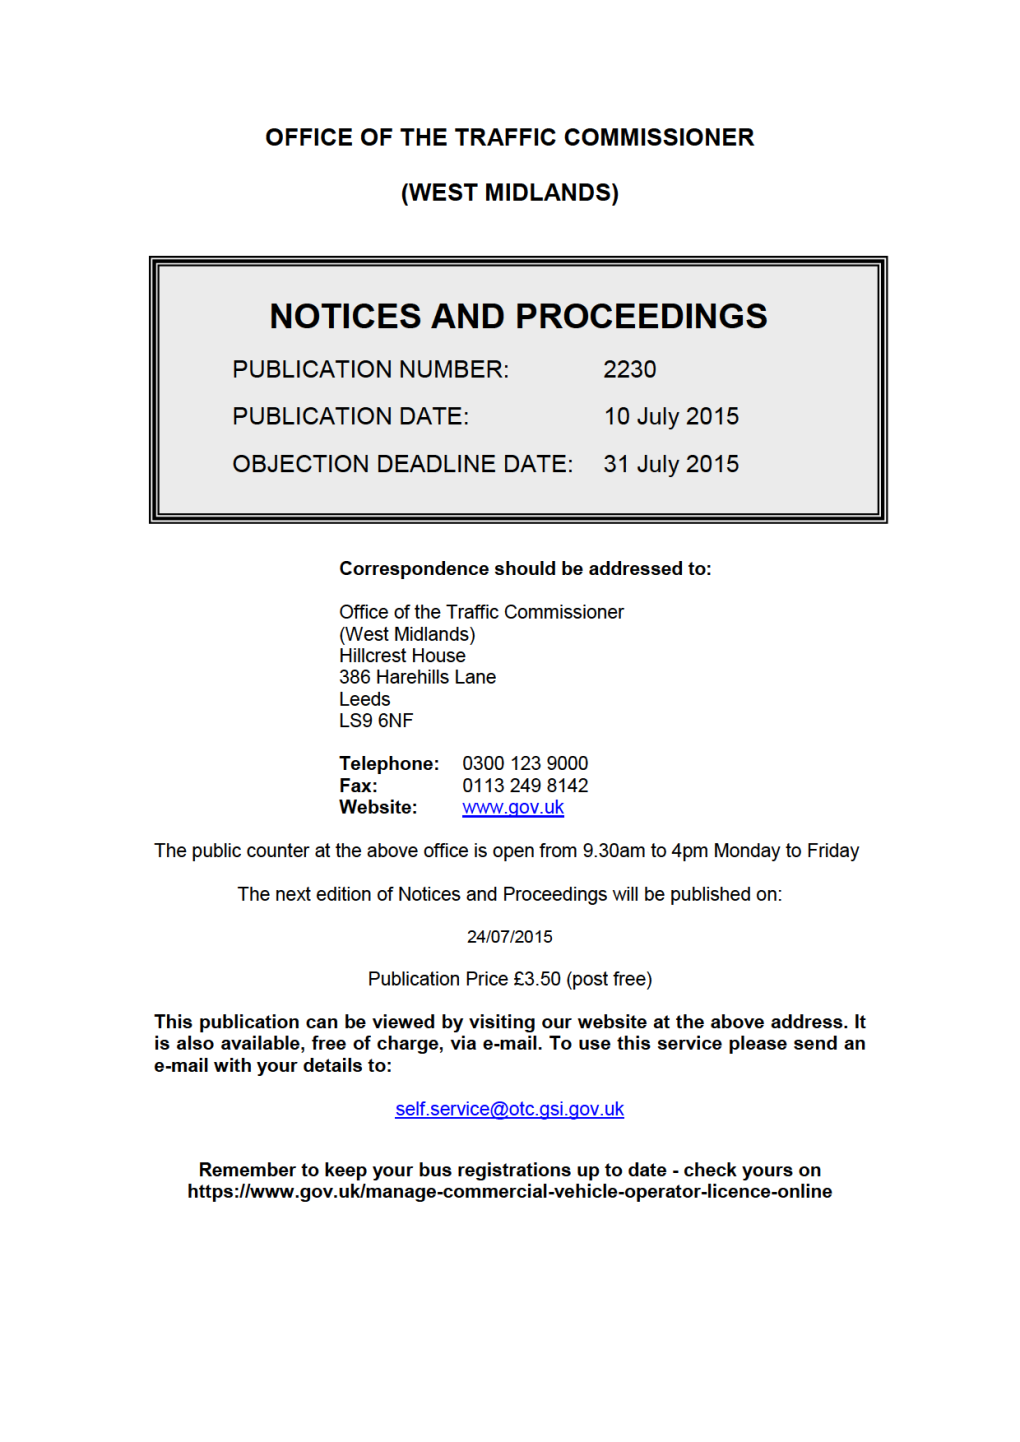 NOTICES and PROCEEDINGS 10 July 2015